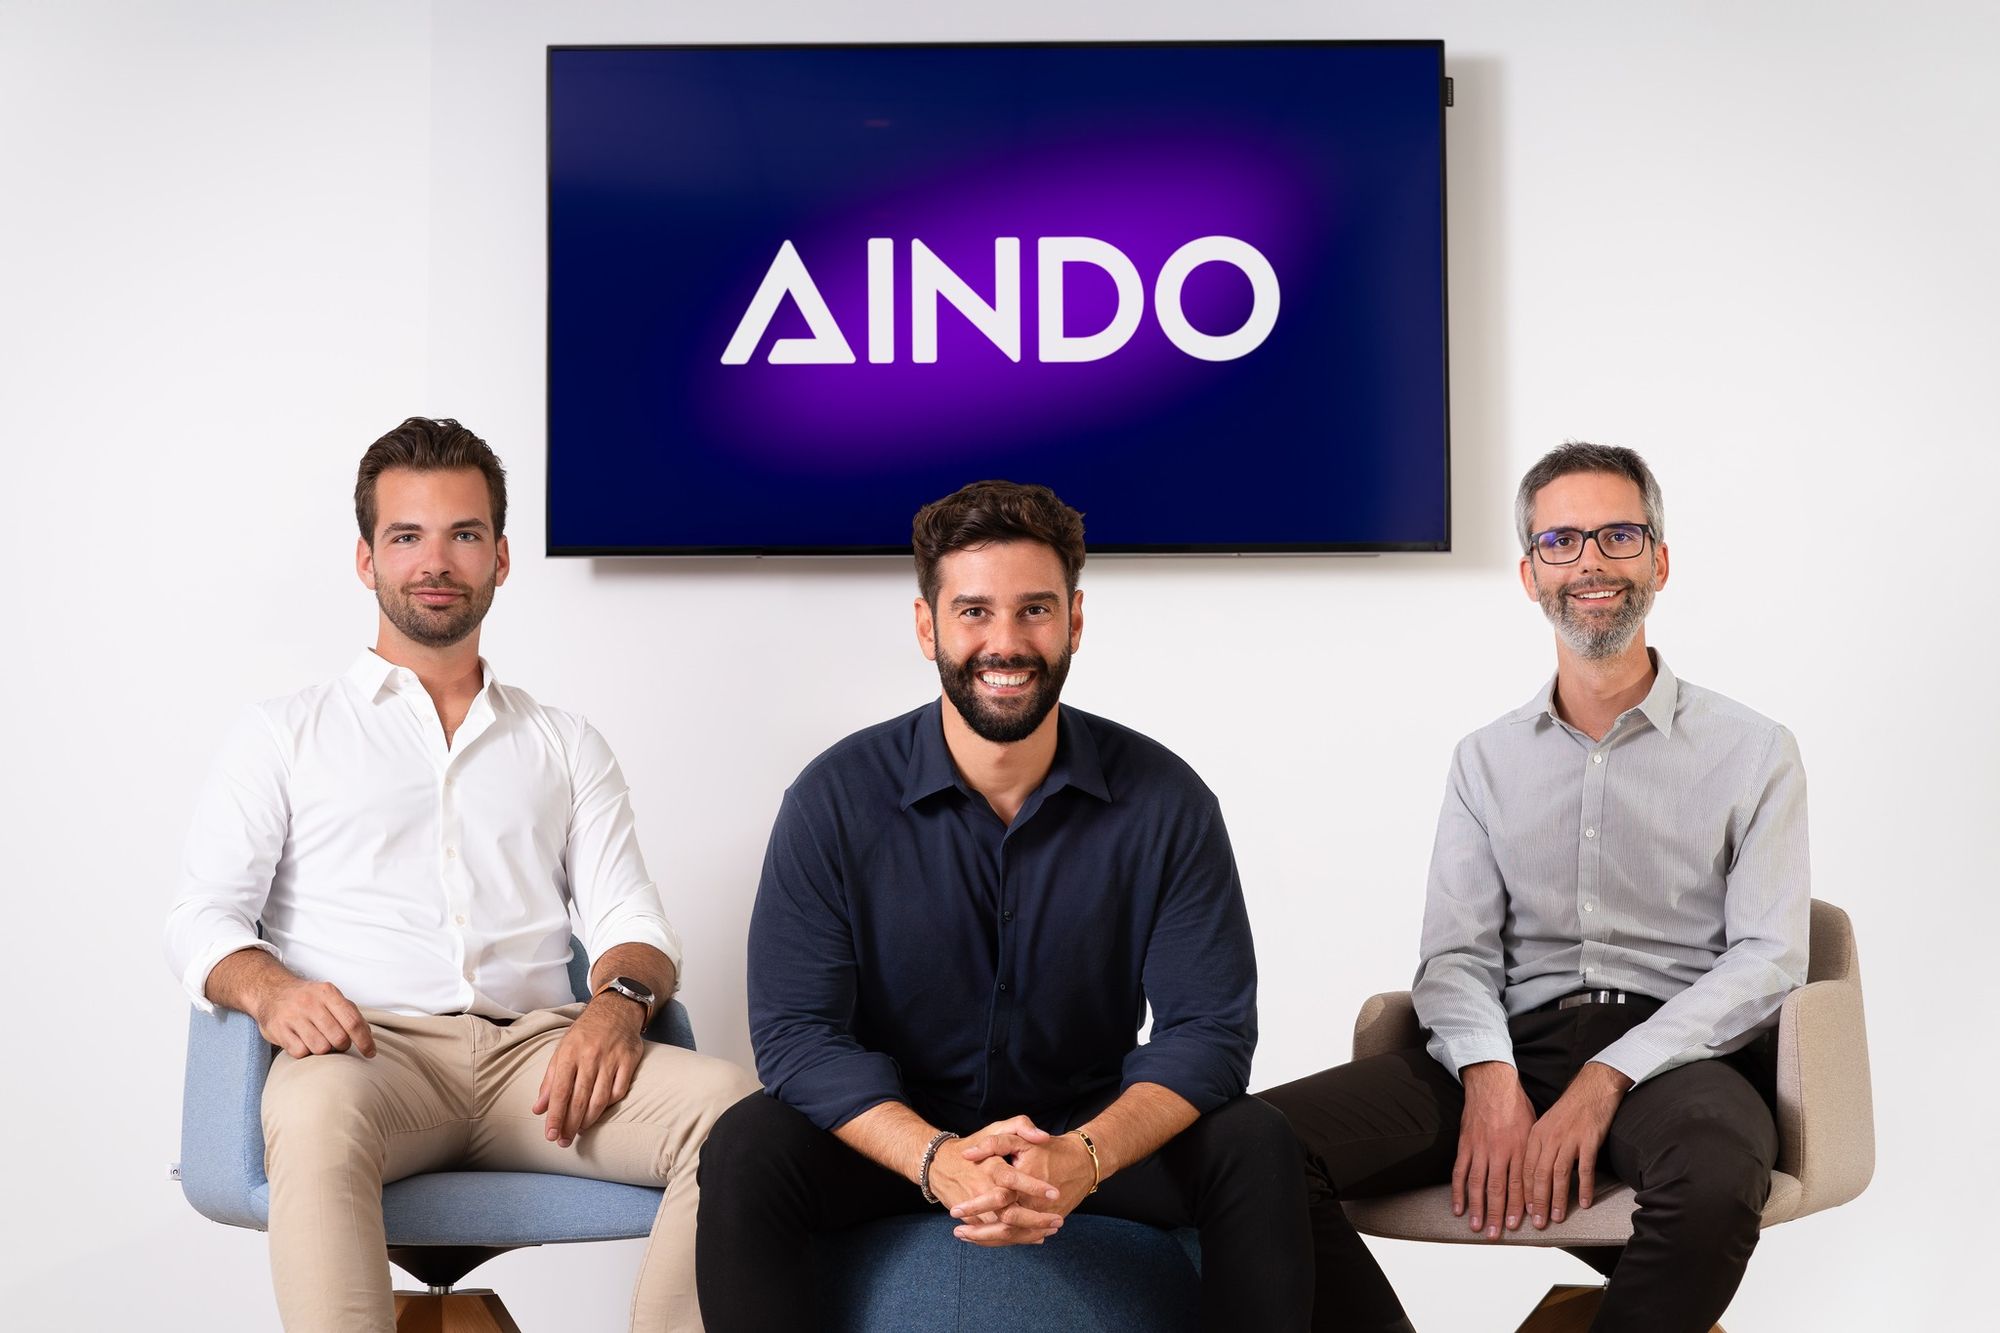 Aindo, a startup specializing in synthetic data, closes a 6M EUR Series A